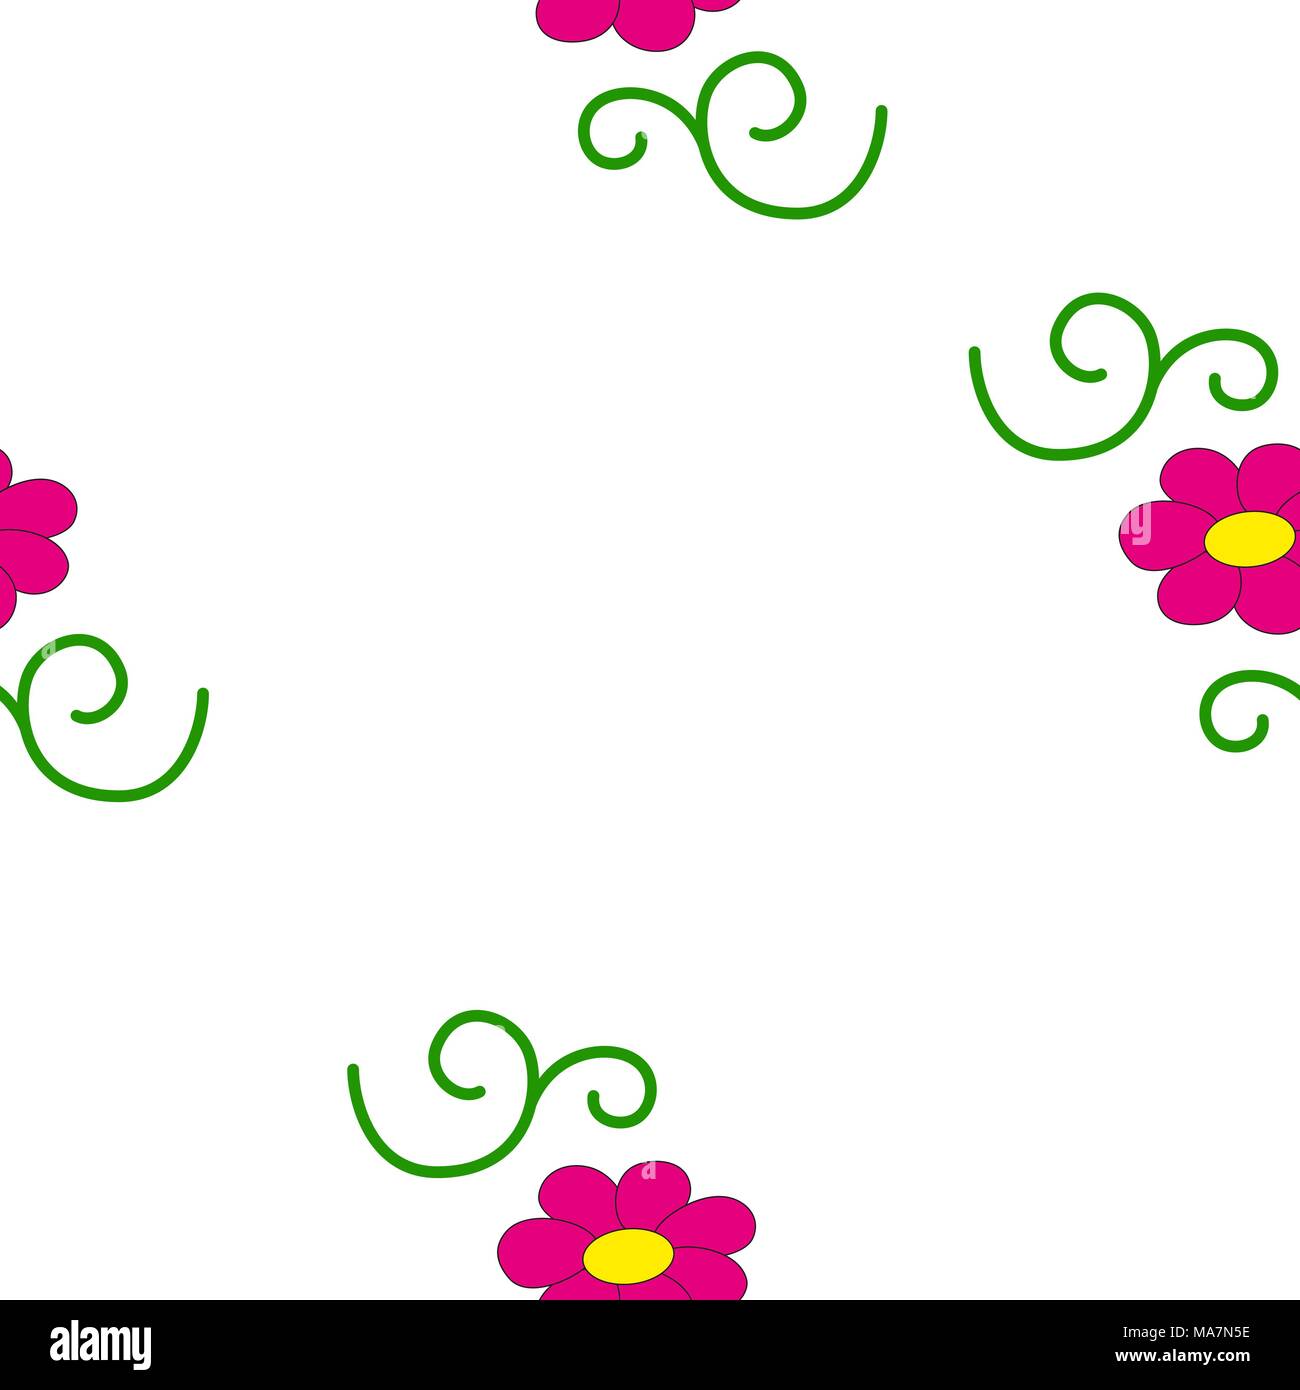 Seamless vector illustration of flowers. Applicable on fabric, tile, wallpaper etc. Stock Vector